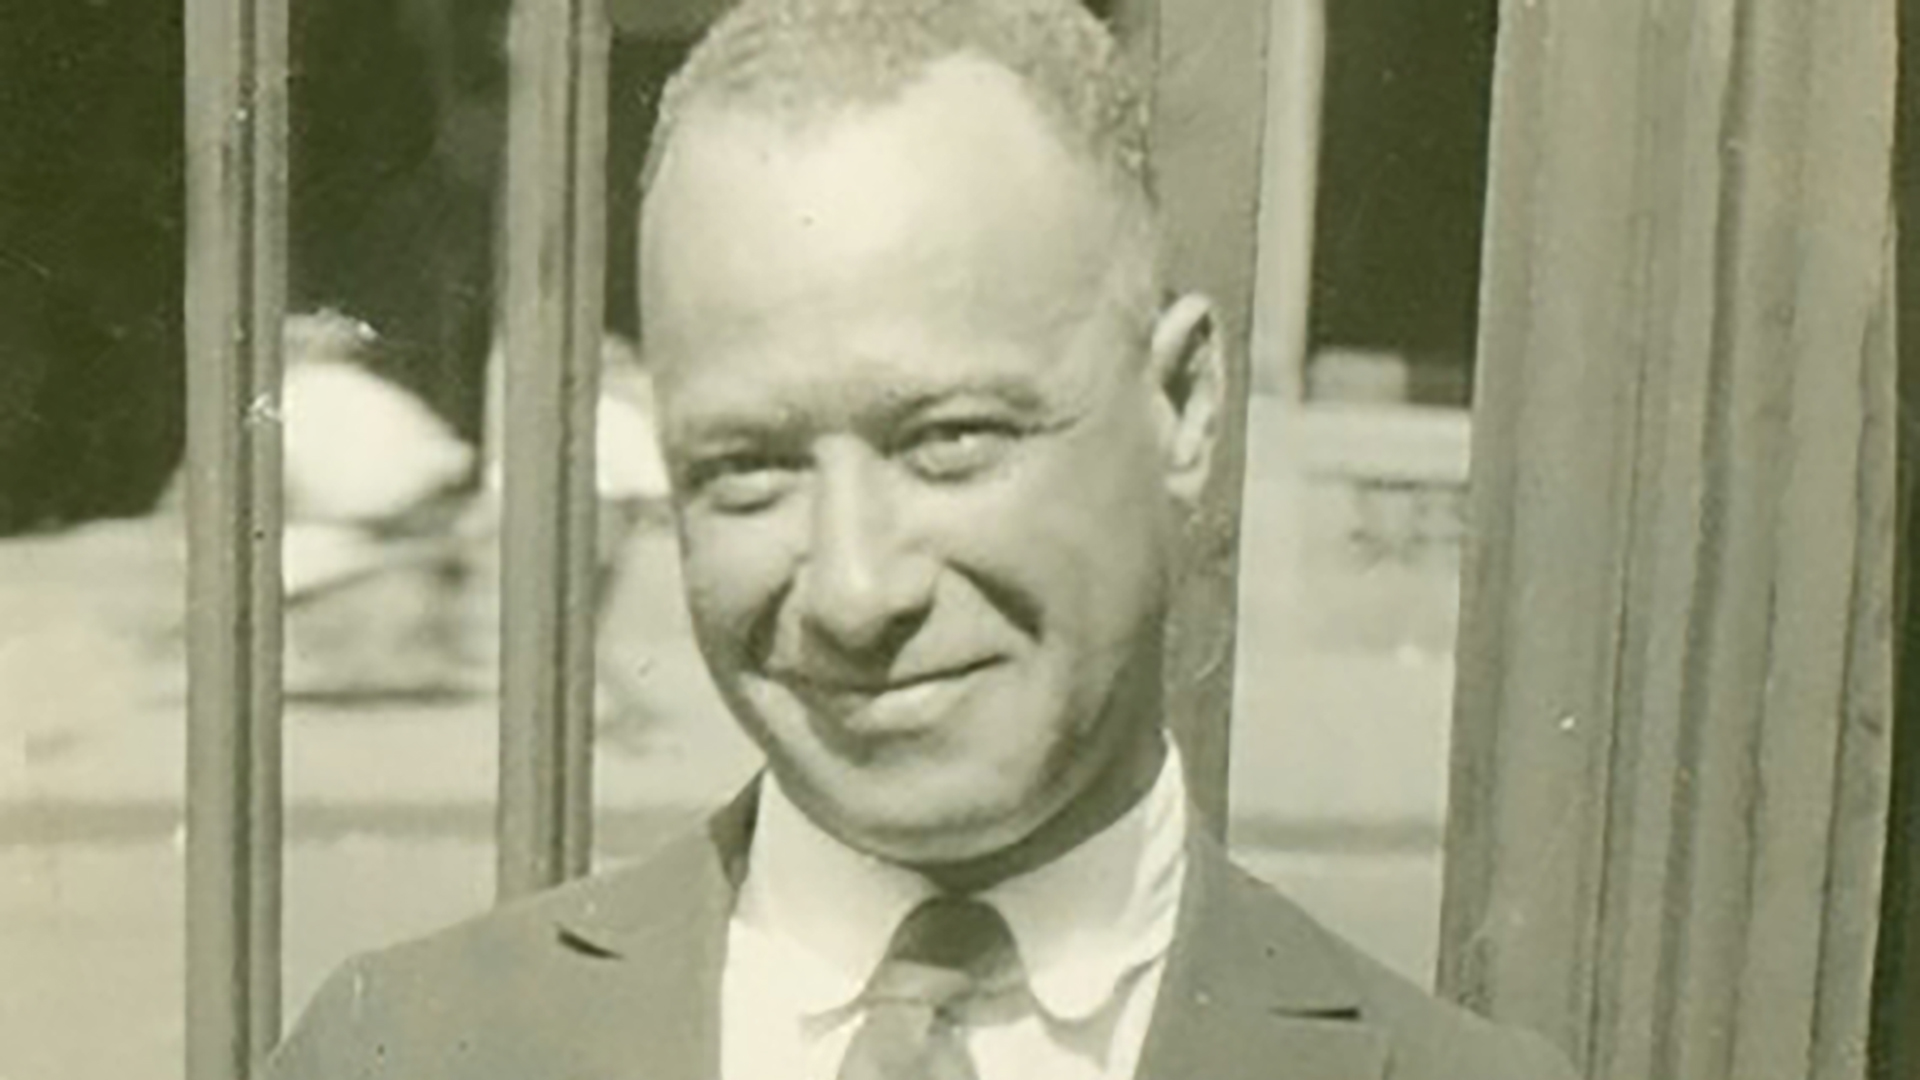 James E. Amos, the Early FBI's Longest-Serving Black Agent, Worked on High-Profile Cases